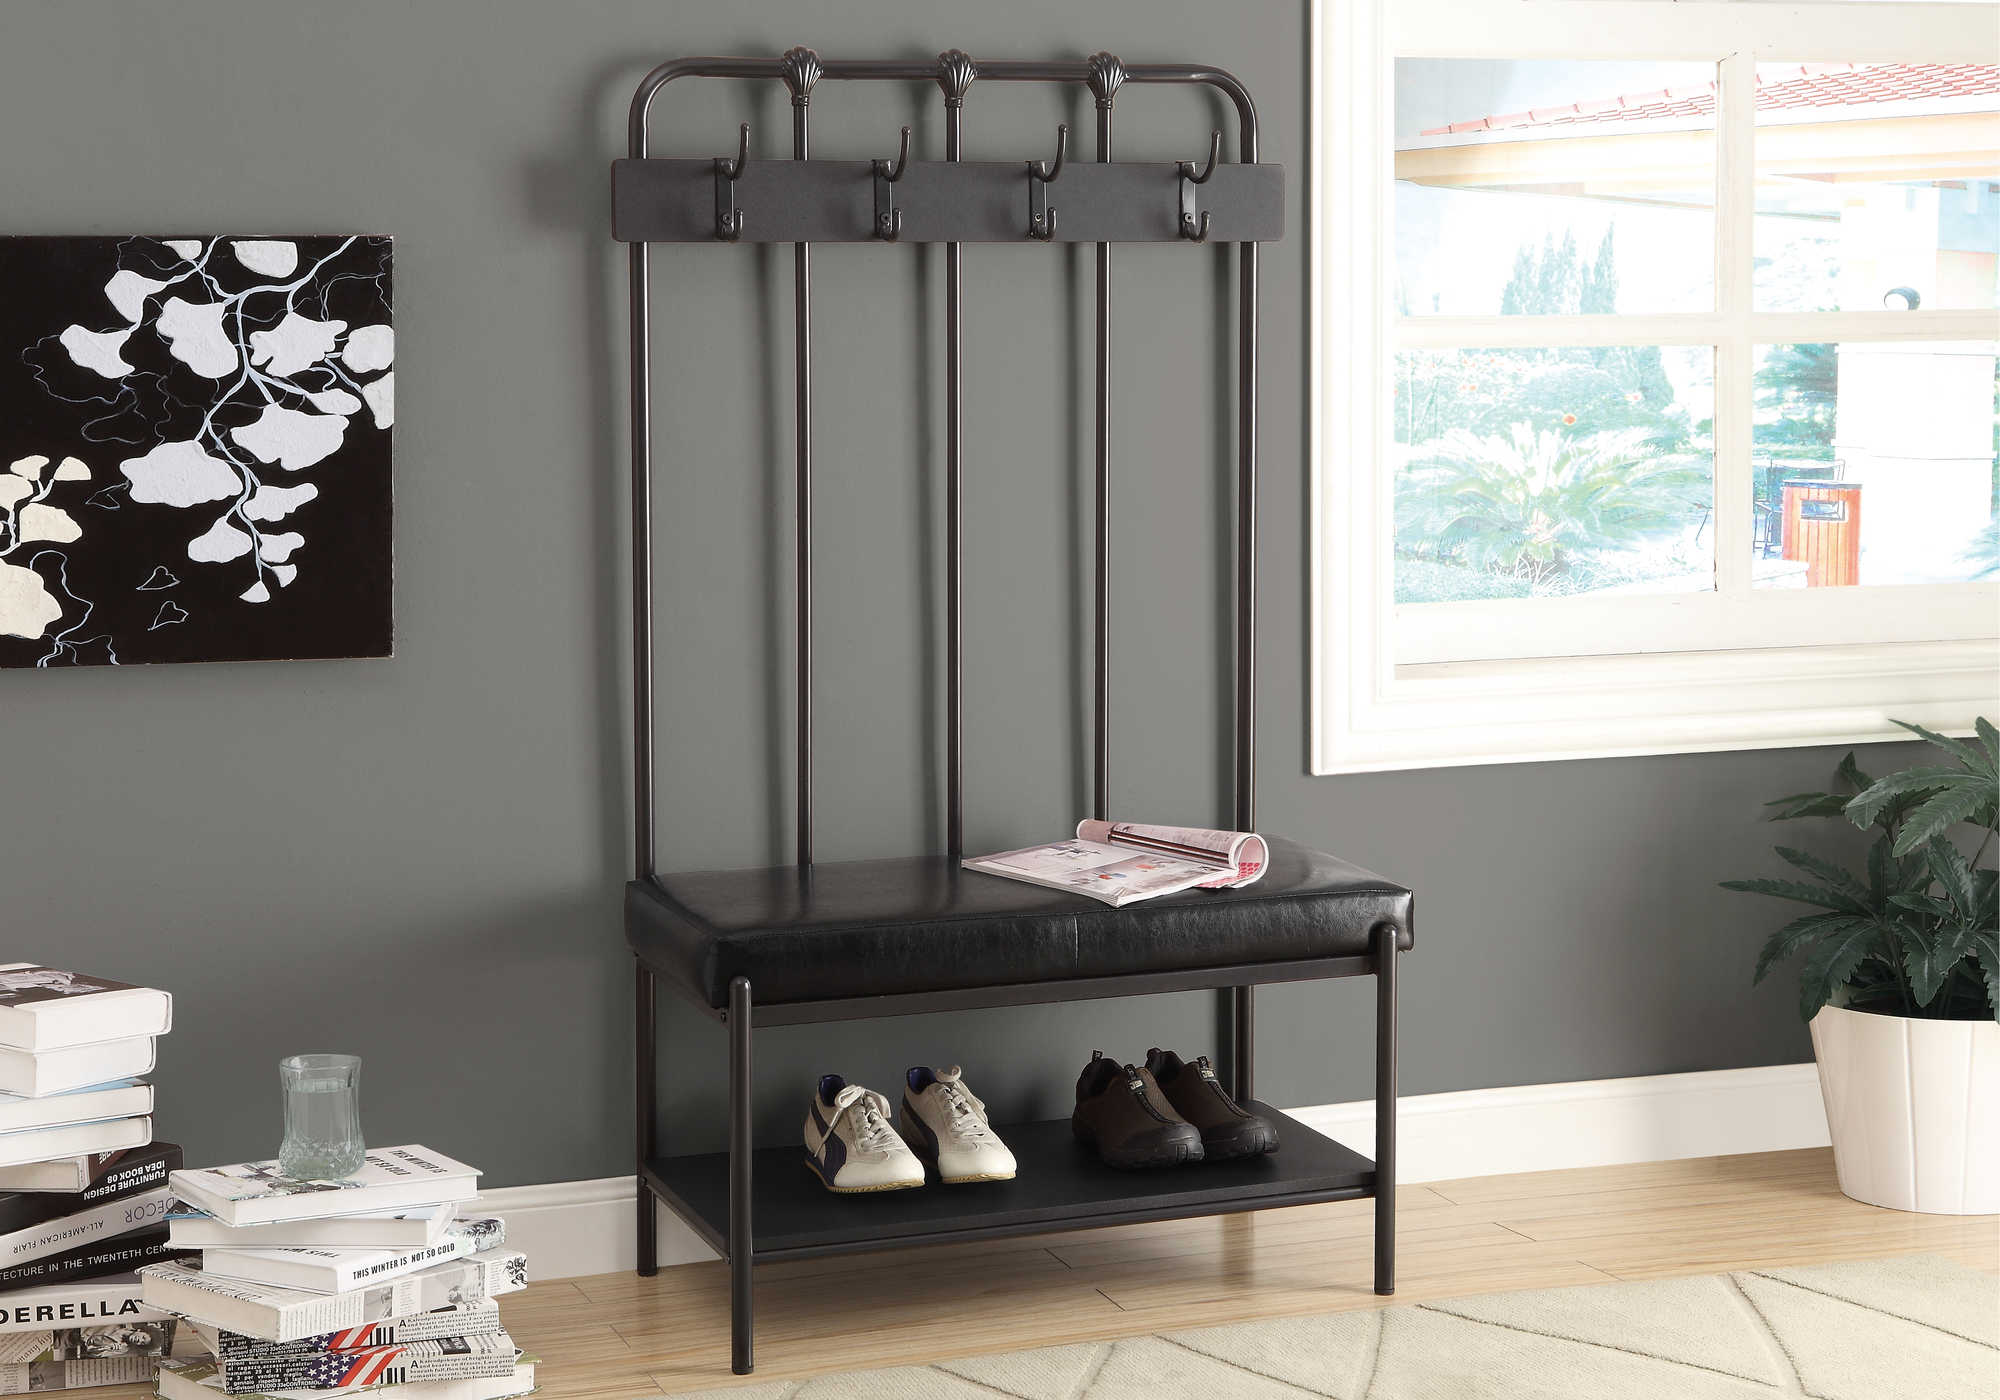 BENCH - 60"H / CHARCOAL GREY METAL HALL ENTRY